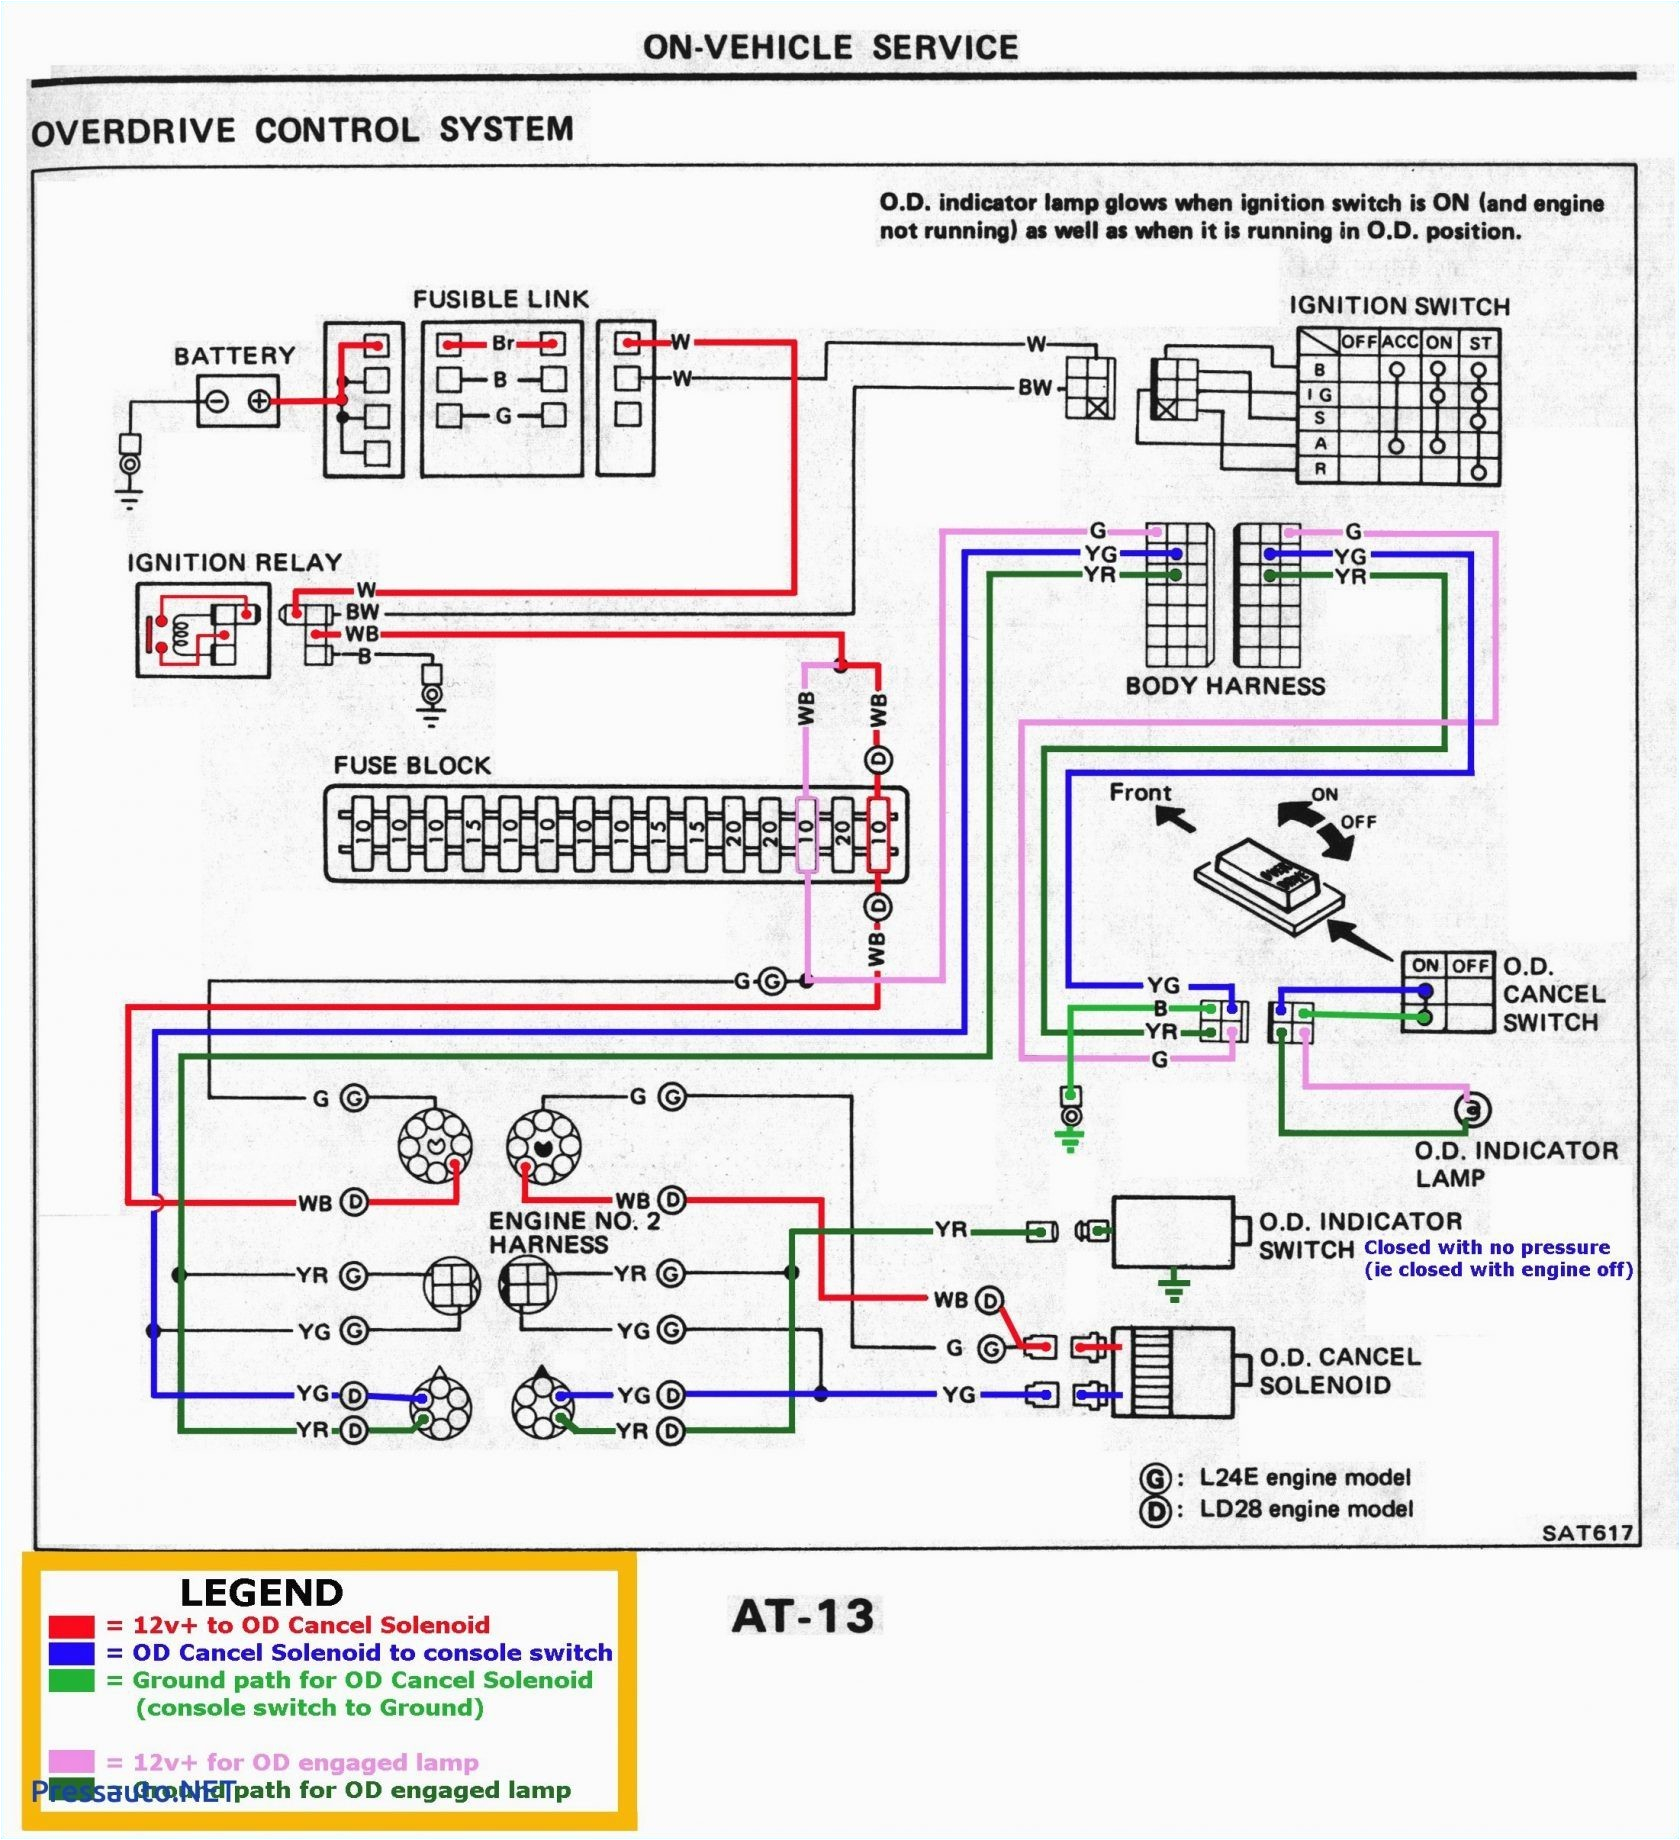 bmw technology guide wiring harness wiring diagrams konsult delux car stereo wiring harness